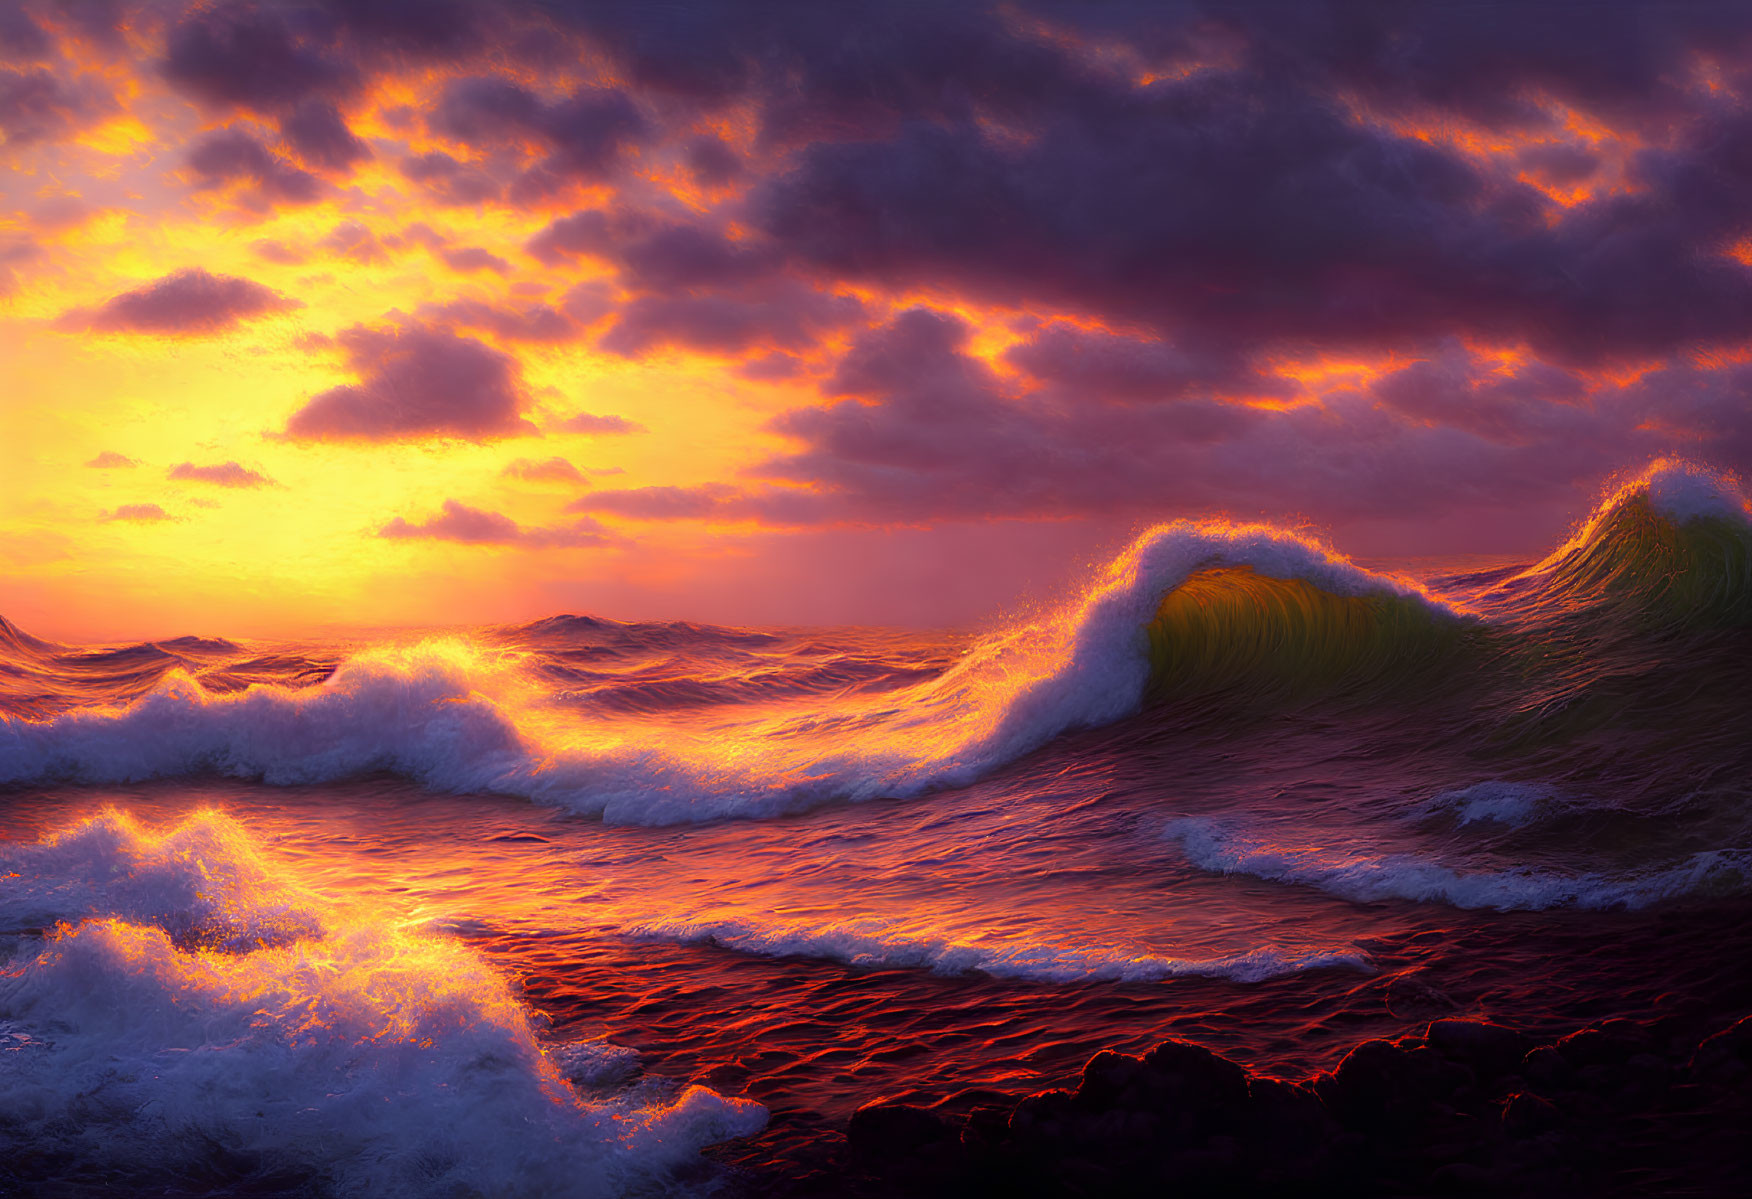 Vivid sunset over turbulent ocean with fiery clouds and powerful waves.